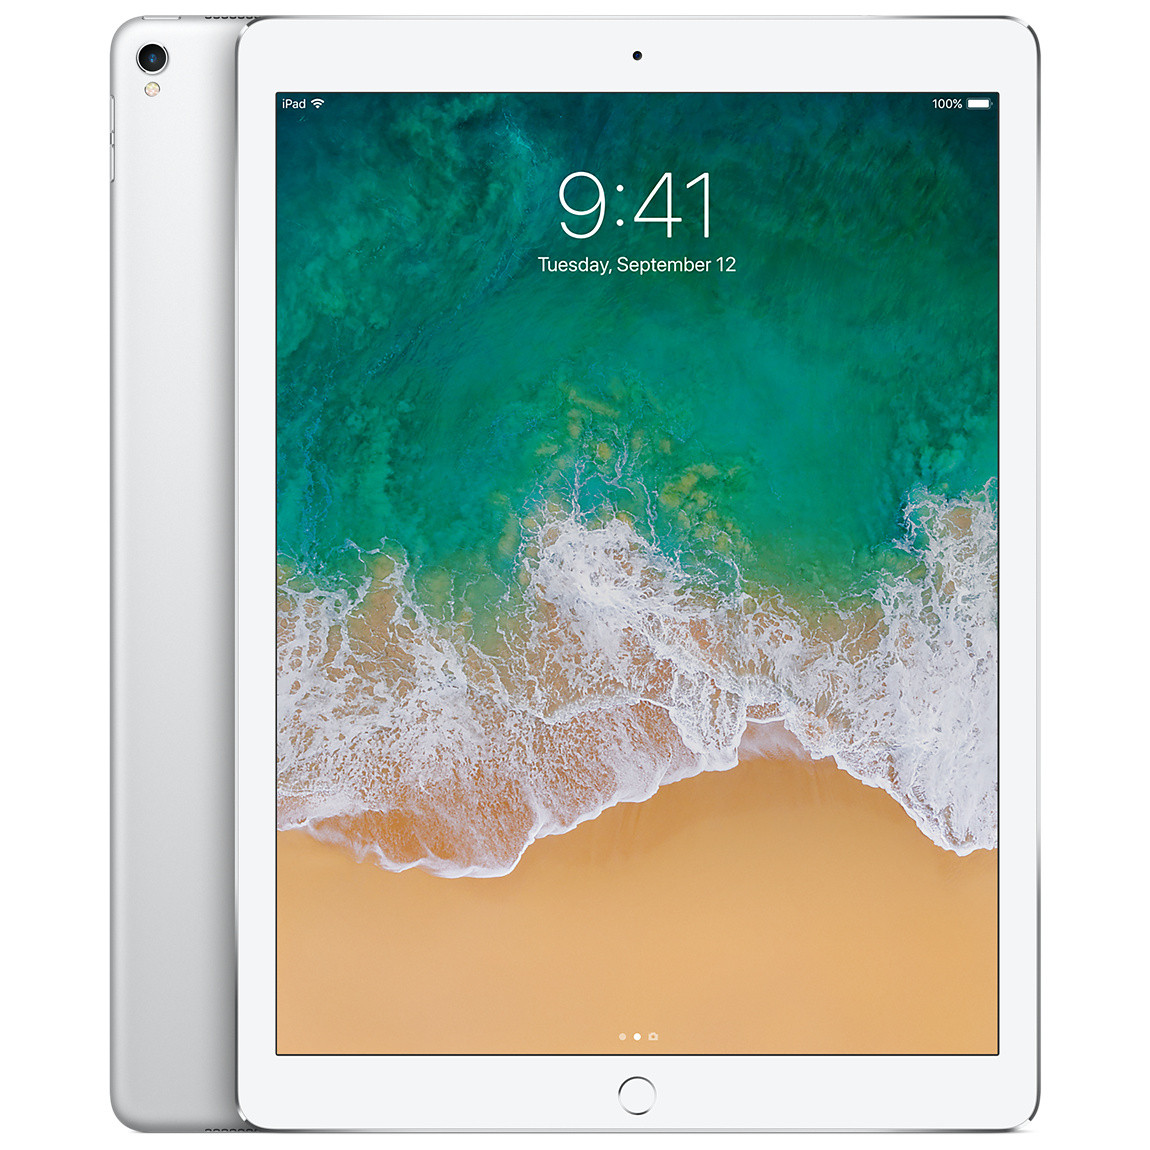 Tablette tactile reconditionné - Apple iPad Pro 2 Wifi - iOS - Argent -  Trade Discount.